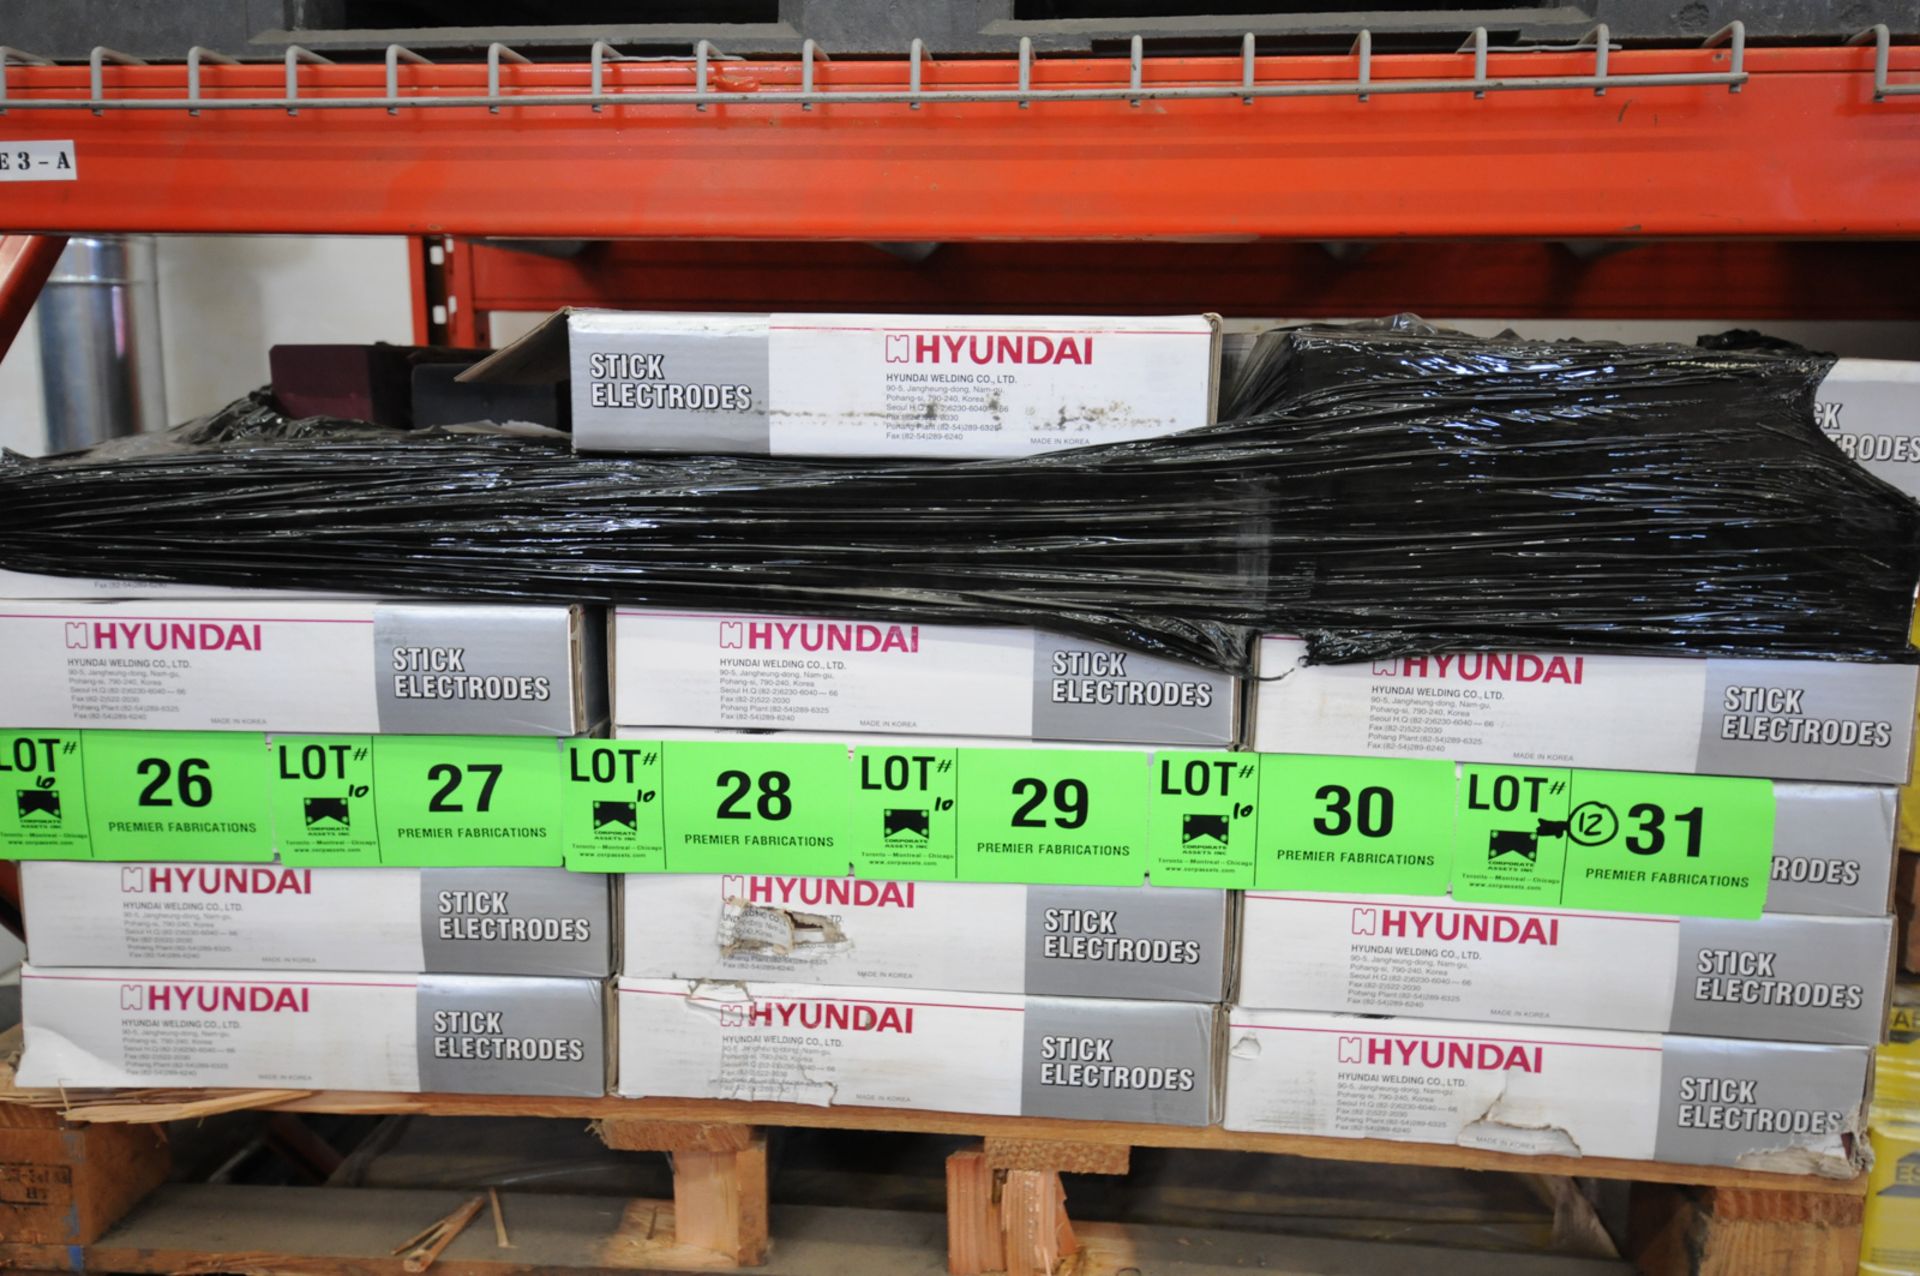 LOT/ (12) 44LB BOXES OF HYUNDAI S-309L.16 1/8"X14" STICK WELDING ELECTRODES CWB CERTIFIED TO CSA W48 - Image 4 of 4